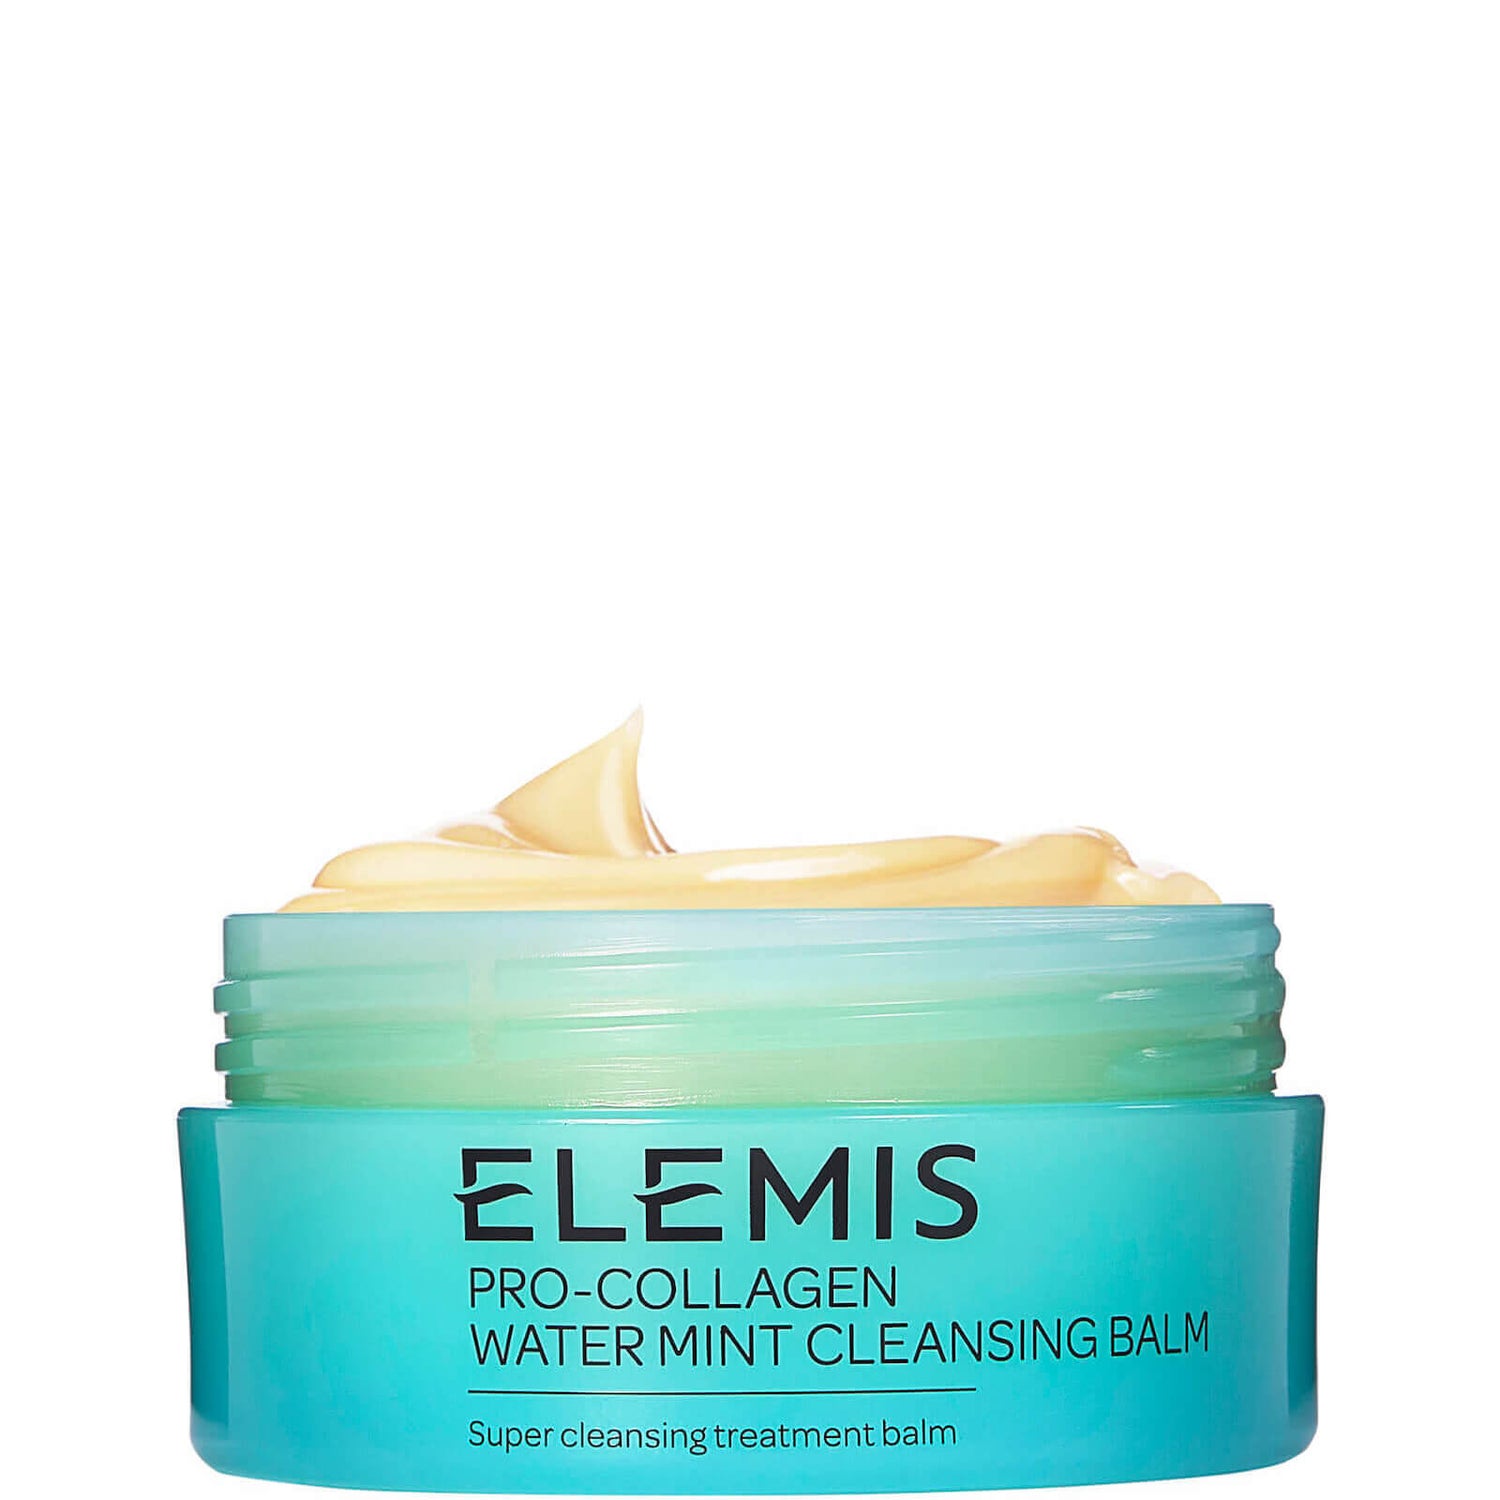 Pro-Collagen Water Mint Cleansing Balm 100g